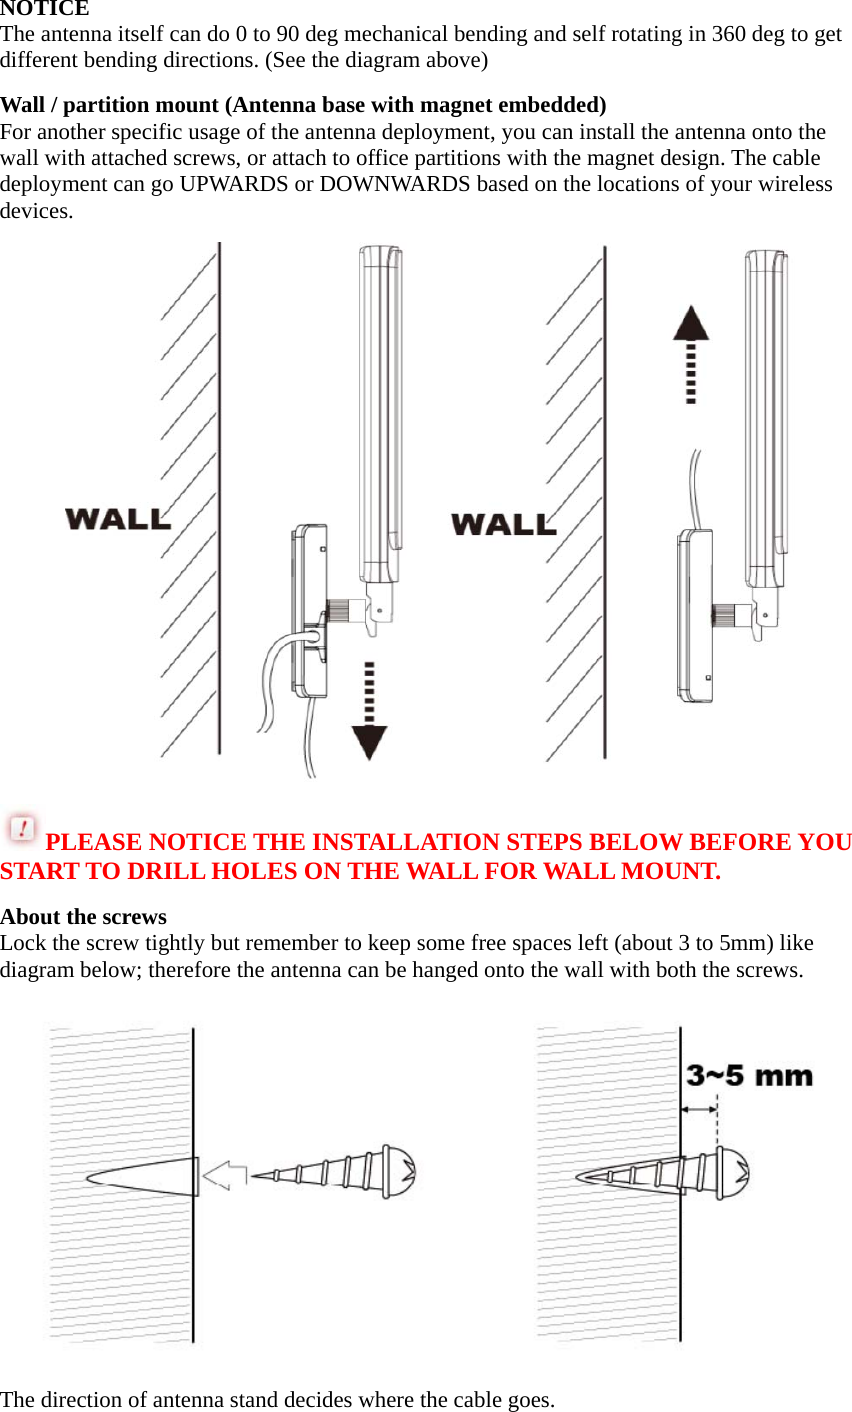 NOTICE The antenna itself can do 0 to 90 deg mechanical bending and self rotating in 360 deg to get different bending directions. (See the diagram above) Wall / partition mount (Antenna base with magnet embedded) For another specific usage of the antenna deployment, you can install the antenna onto the wall with attached screws, or attach to office partitions with the magnet design. The cable deployment can go UPWARDS or DOWNWARDS based on the locations of your wireless devices.  PLEASE NOTICE THE INSTALLATION STEPS BELOW BEFORE YOU START TO DRILL HOLES ON THE WALL FOR WALL MOUNT. About the screws Lock the screw tightly but remember to keep some free spaces left (about 3 to 5mm) like diagram below; therefore the antenna can be hanged onto the wall with both the screws.  The direction of antenna stand decides where the cable goes. 